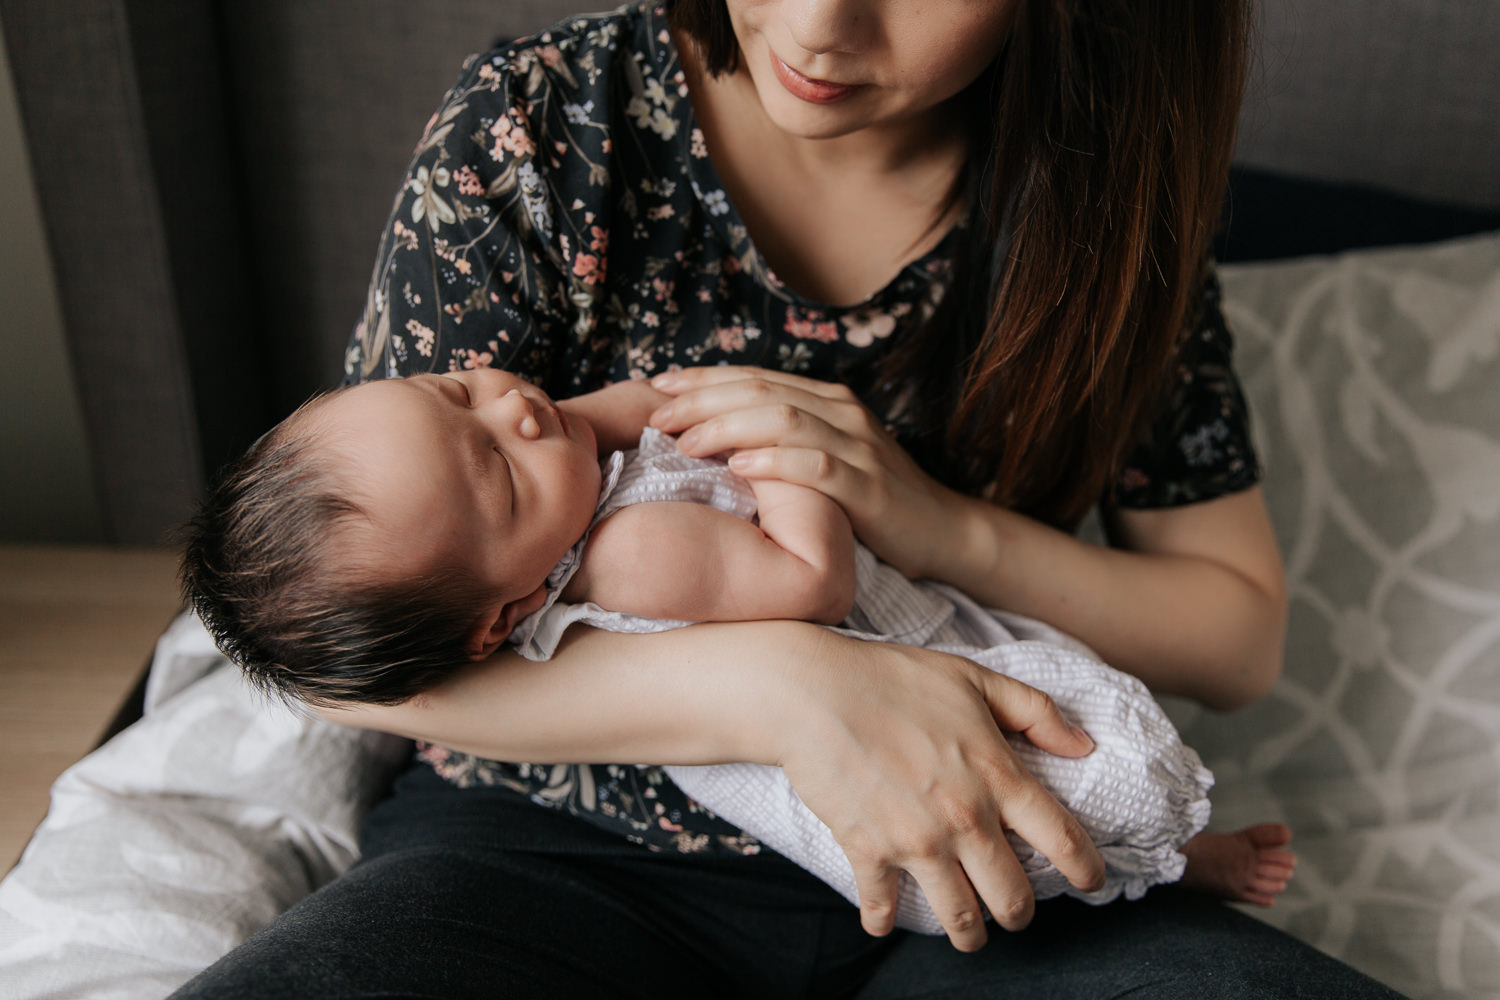 mom with long dark hair wearing floral top sitting on master bed holding and looking at 2 week old baby girl in her arms - Barrie Lifestyle Photography